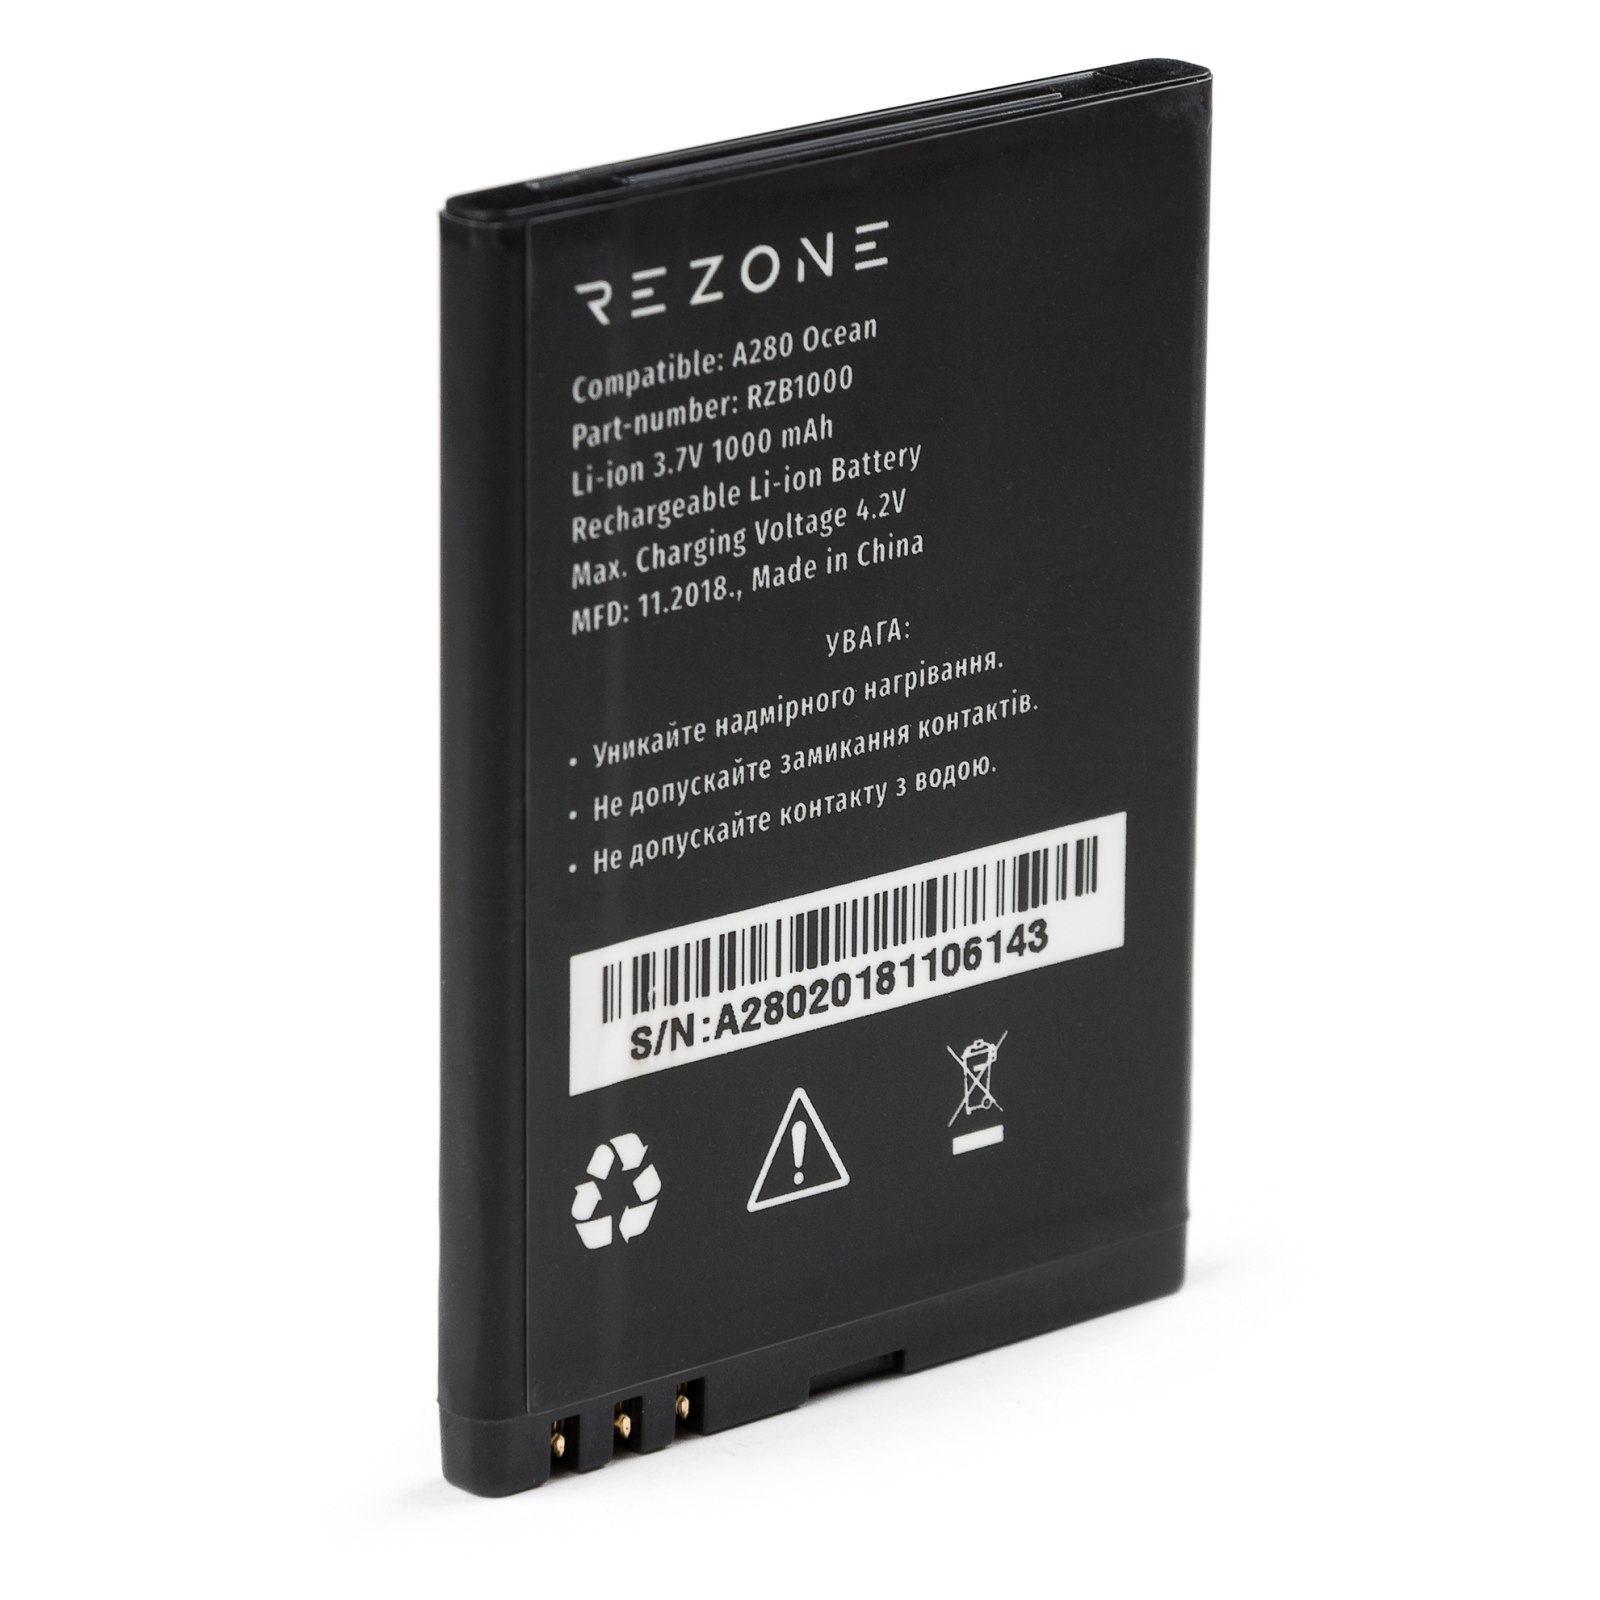 Акумуляторна батарея Rezone for A280 Ocean 1000mah (and all compatible with BL-4D) (BL-4D) зображення 2